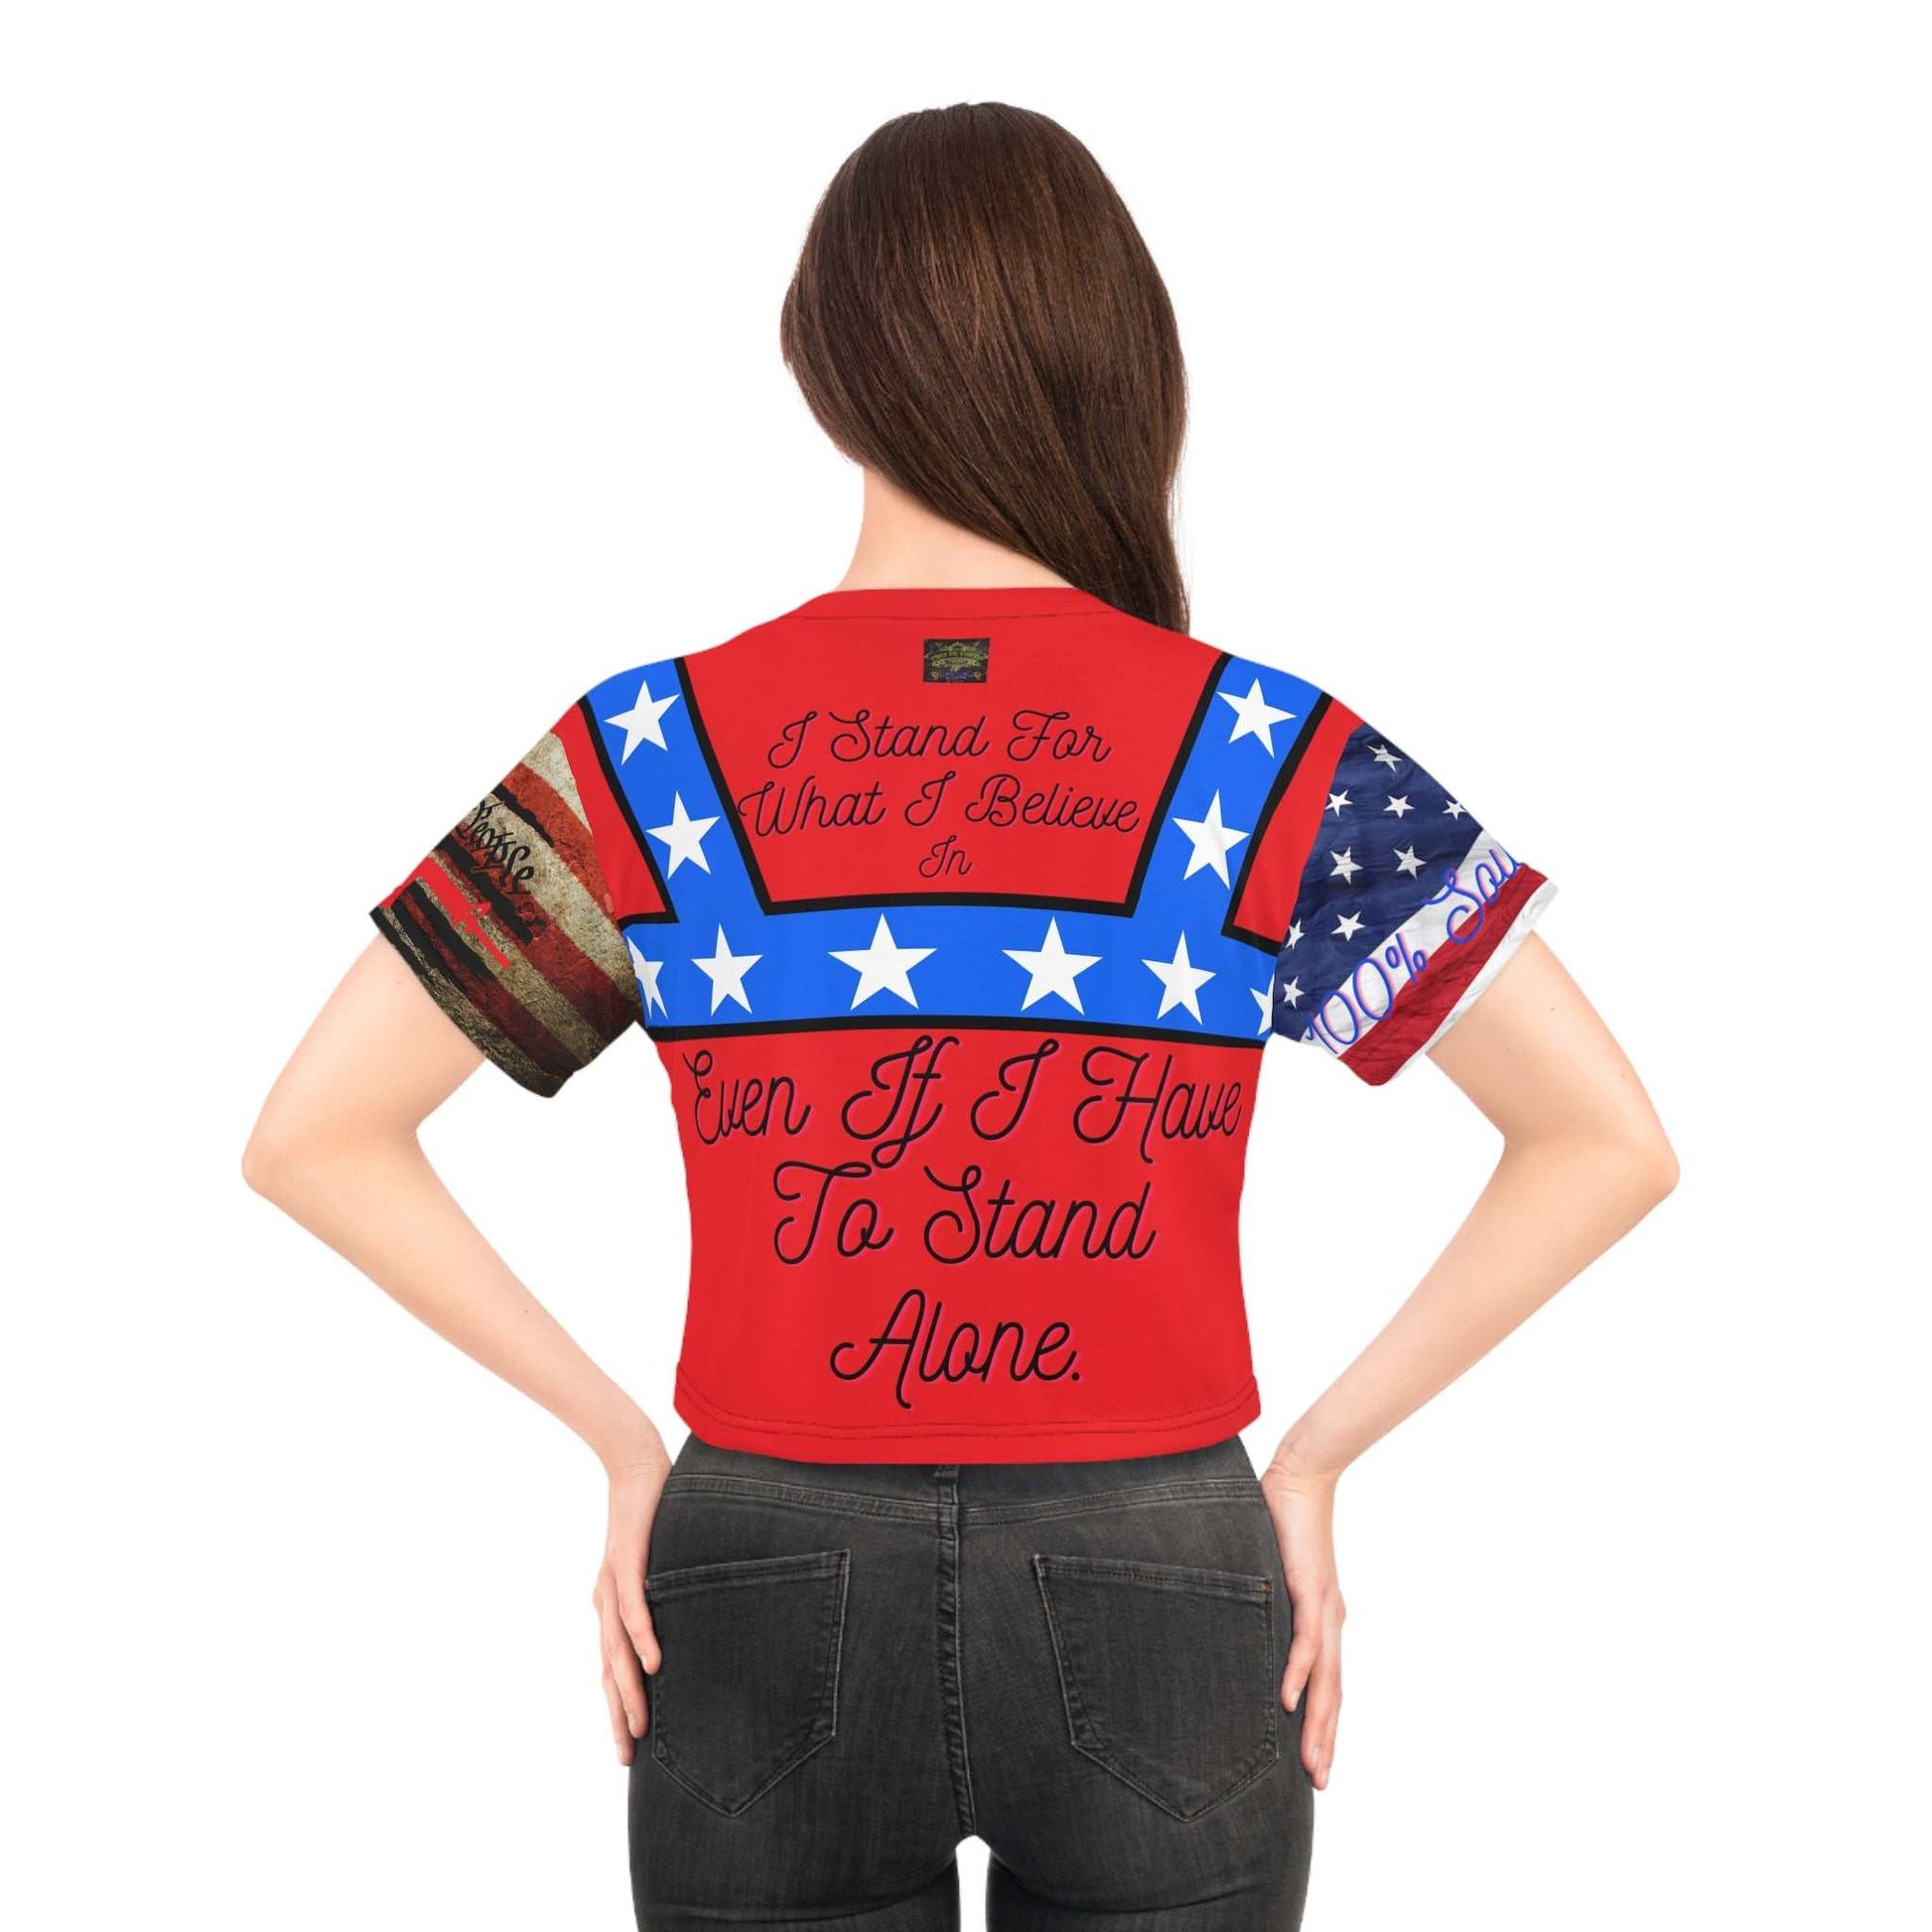 I stand for what I believe in even if I have to stand alone-Gildan SofPatriotic shirt-Custom Gildan Soft-style